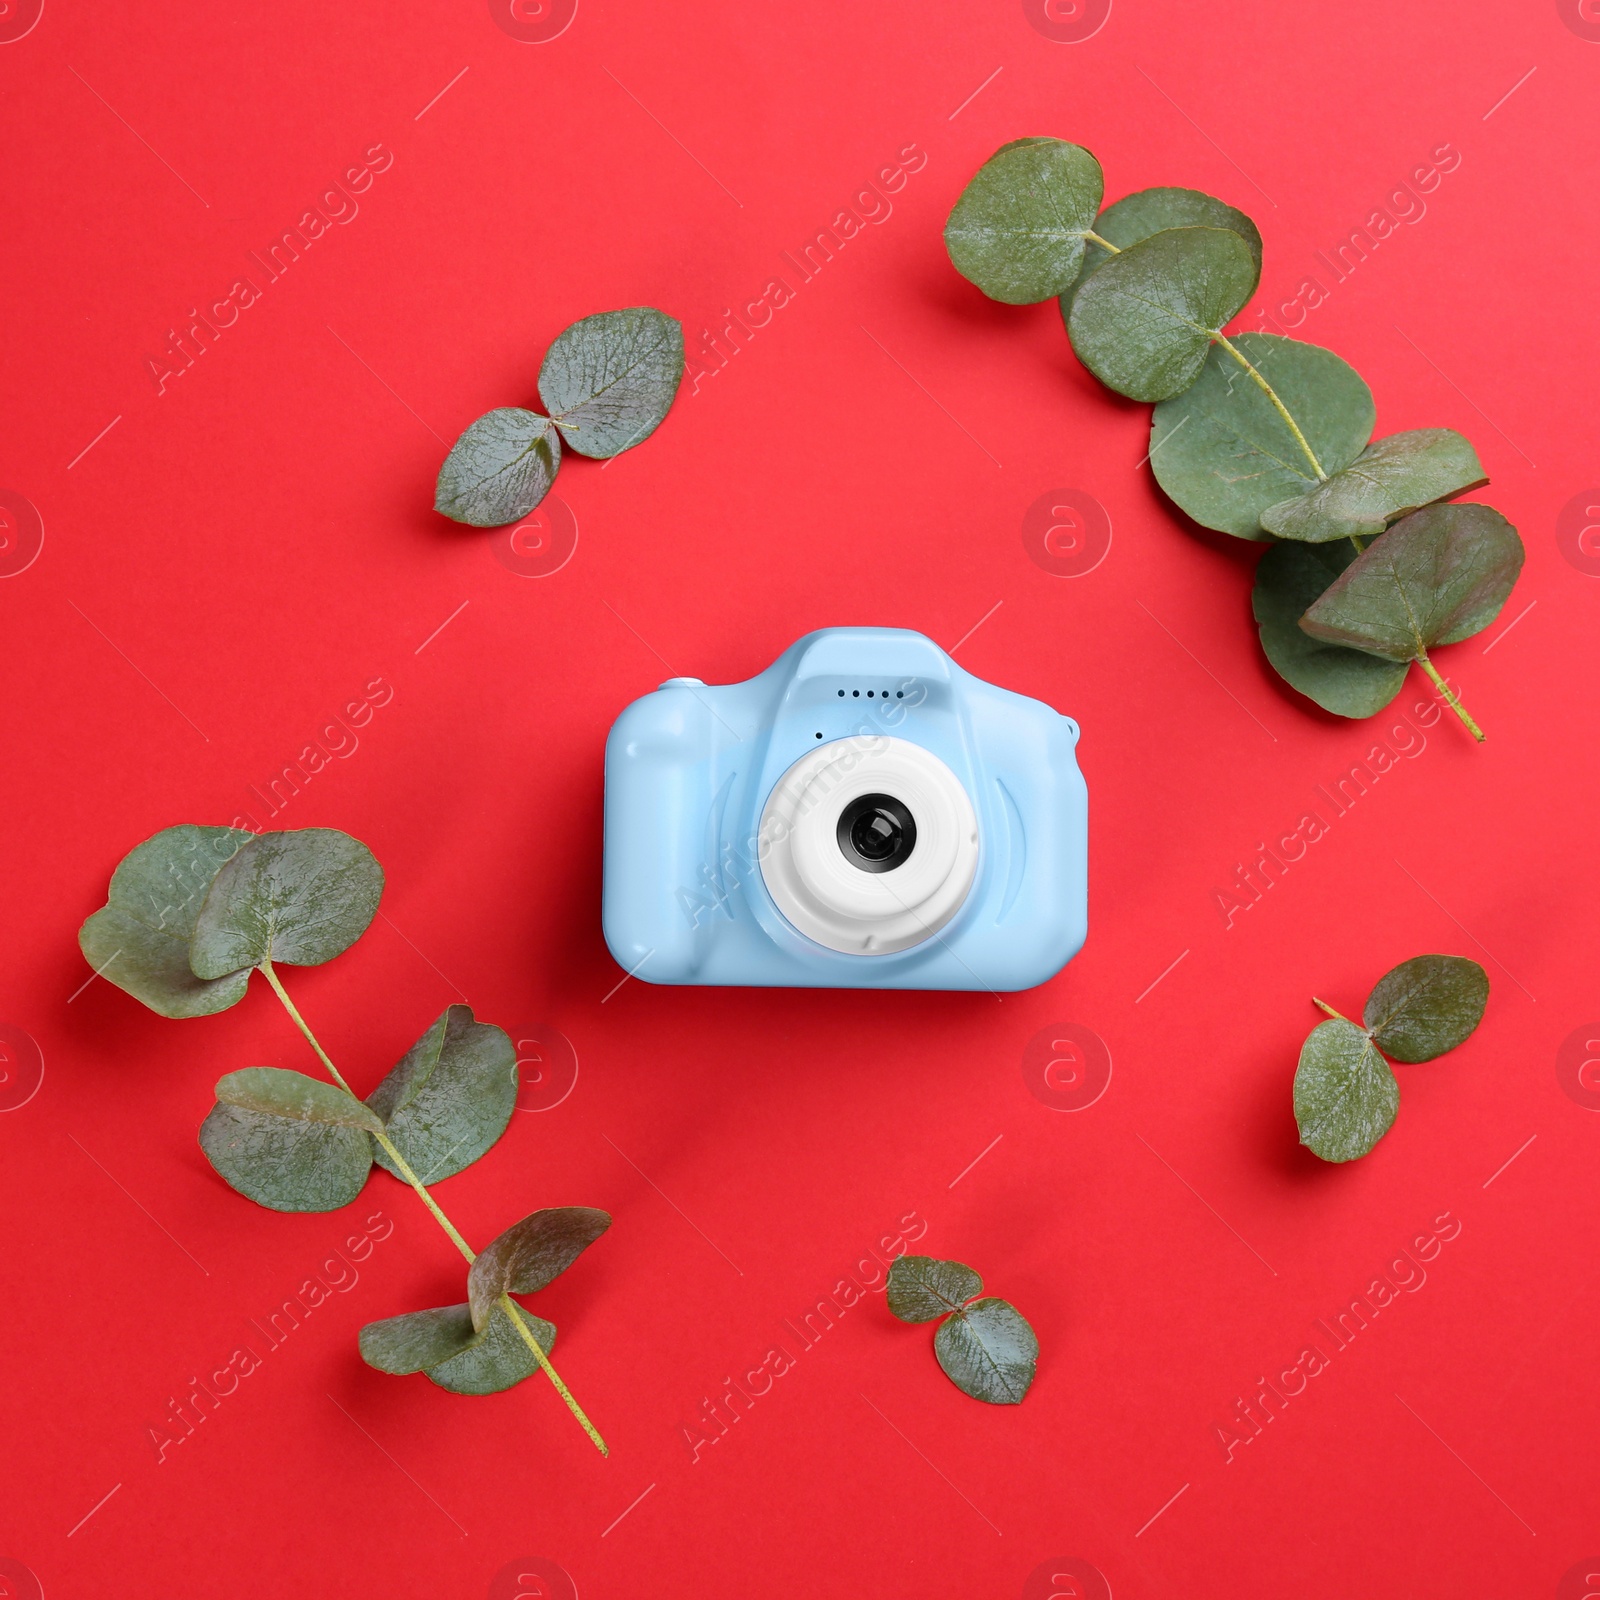 Photo of Toy camera and eucalyptus on red background, top view